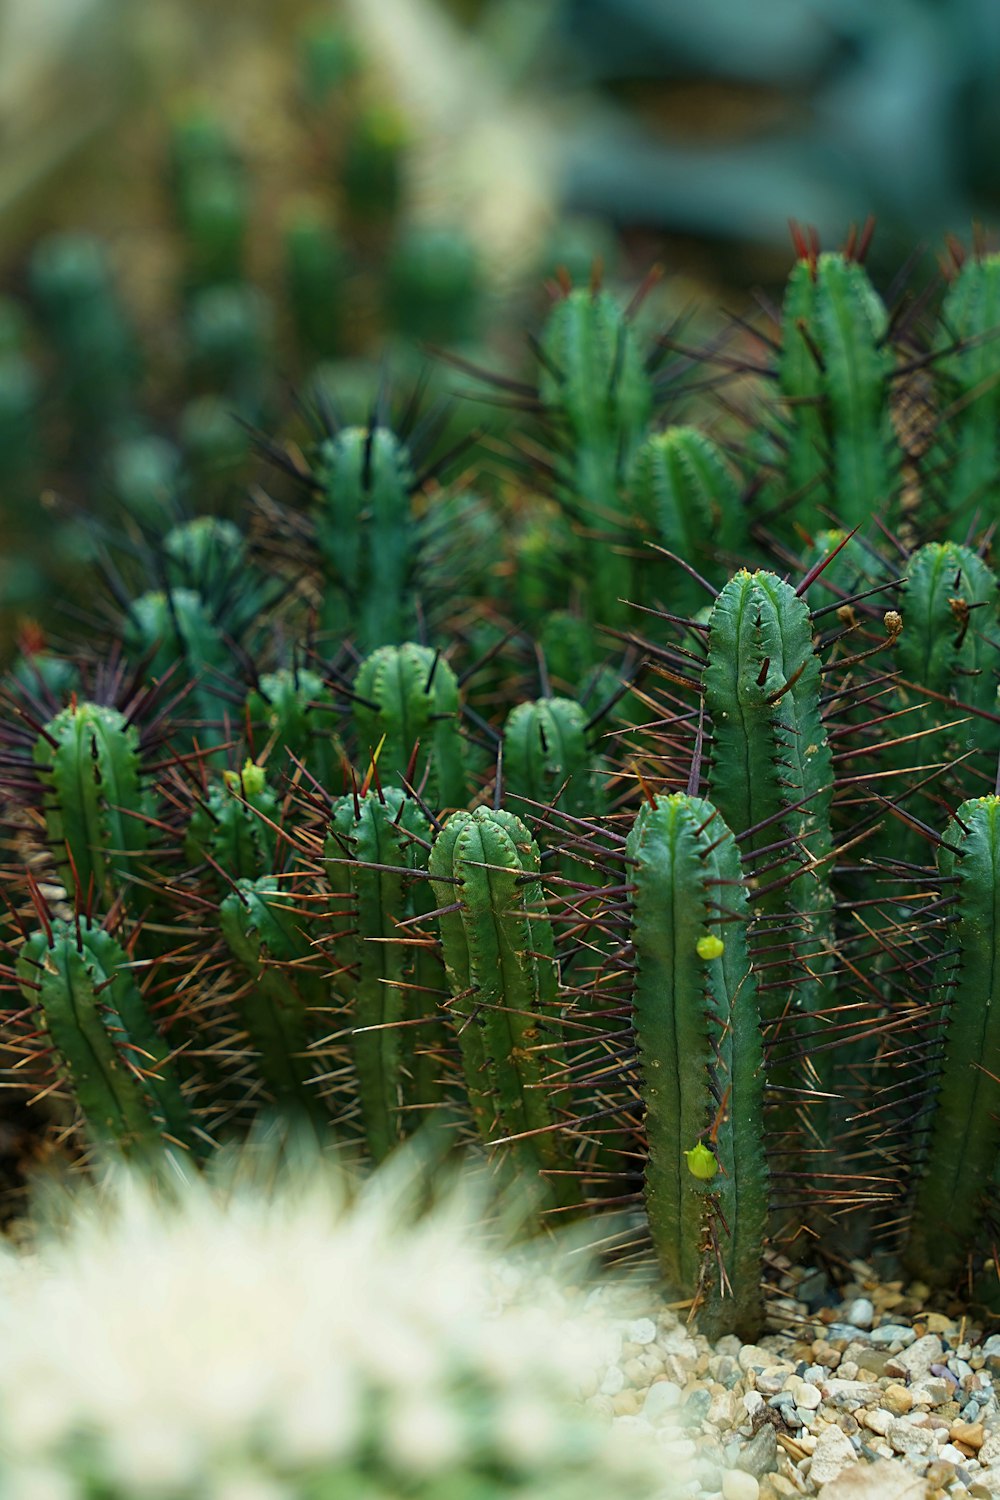 a group of green cactus plants in a garden